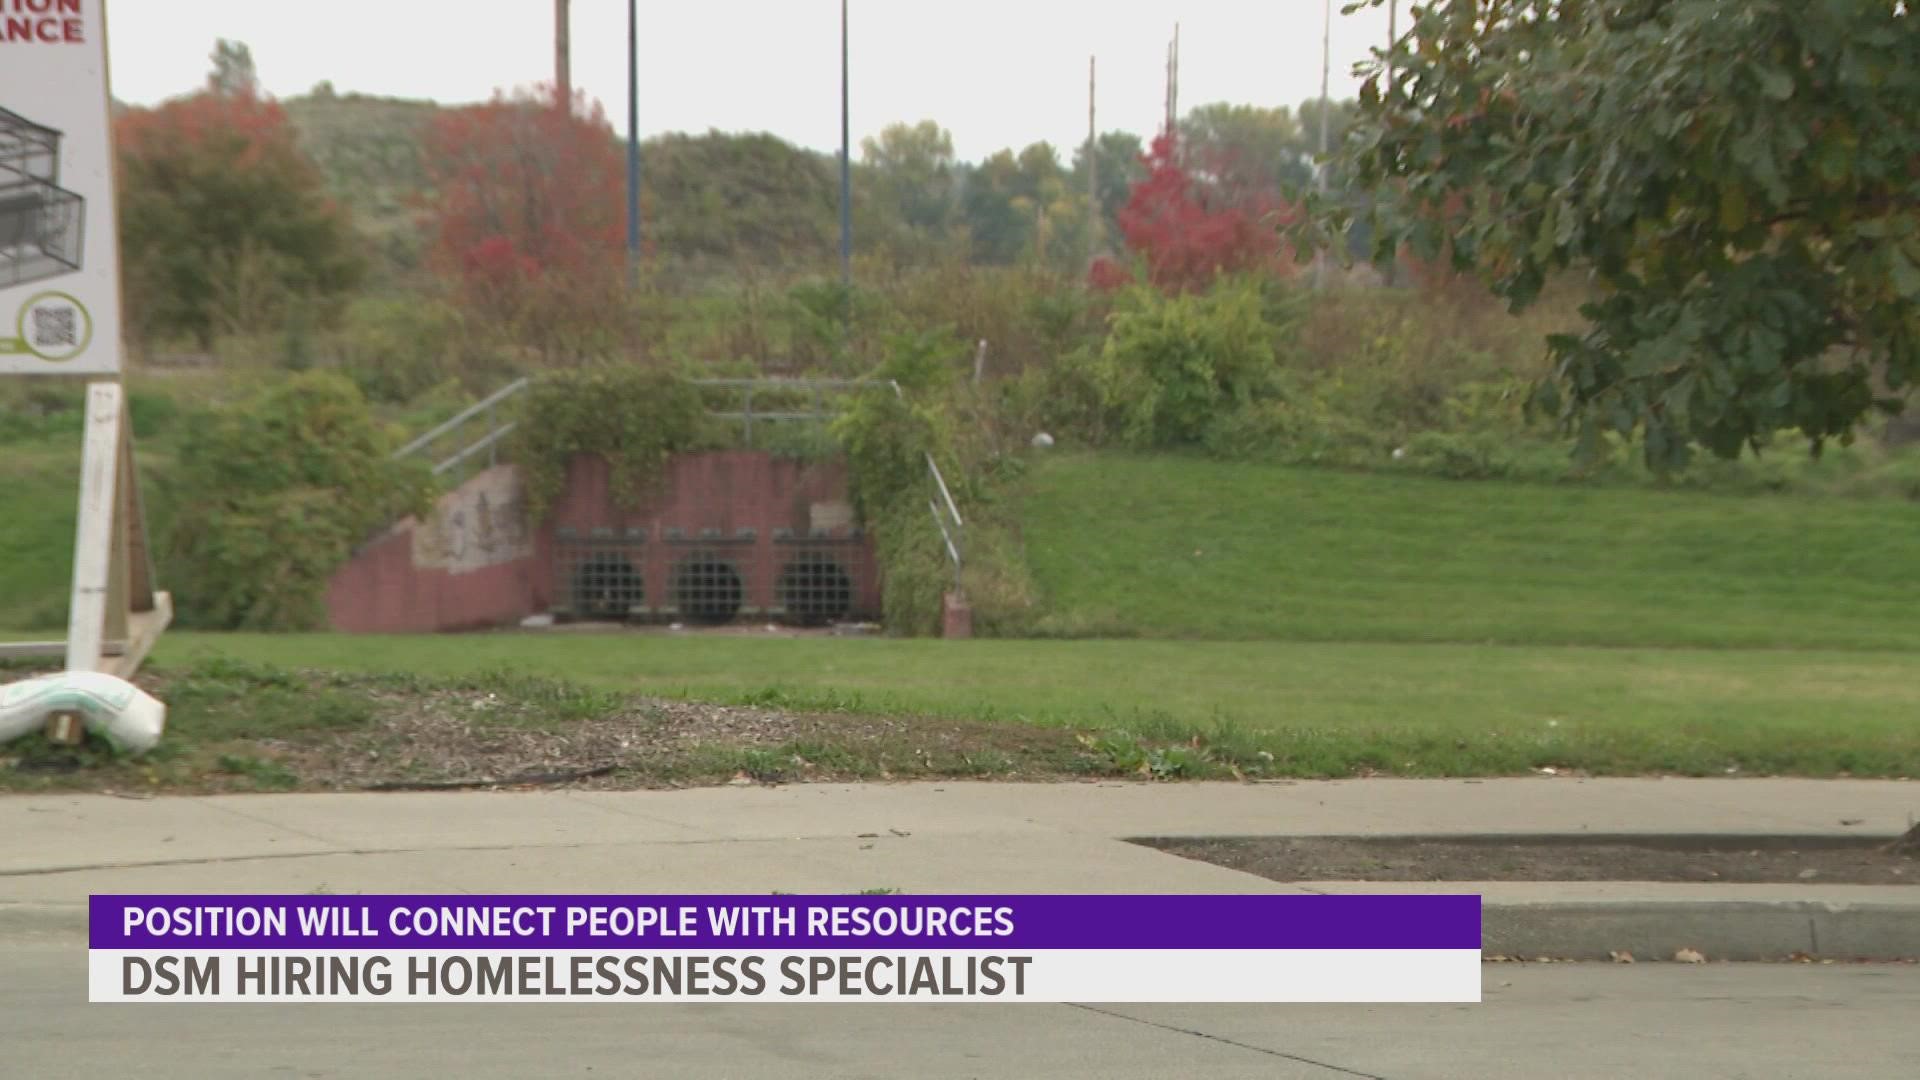 In early October, the city cleared a camp of homeless residents just down the street from Central Iowa Shelter & Services.